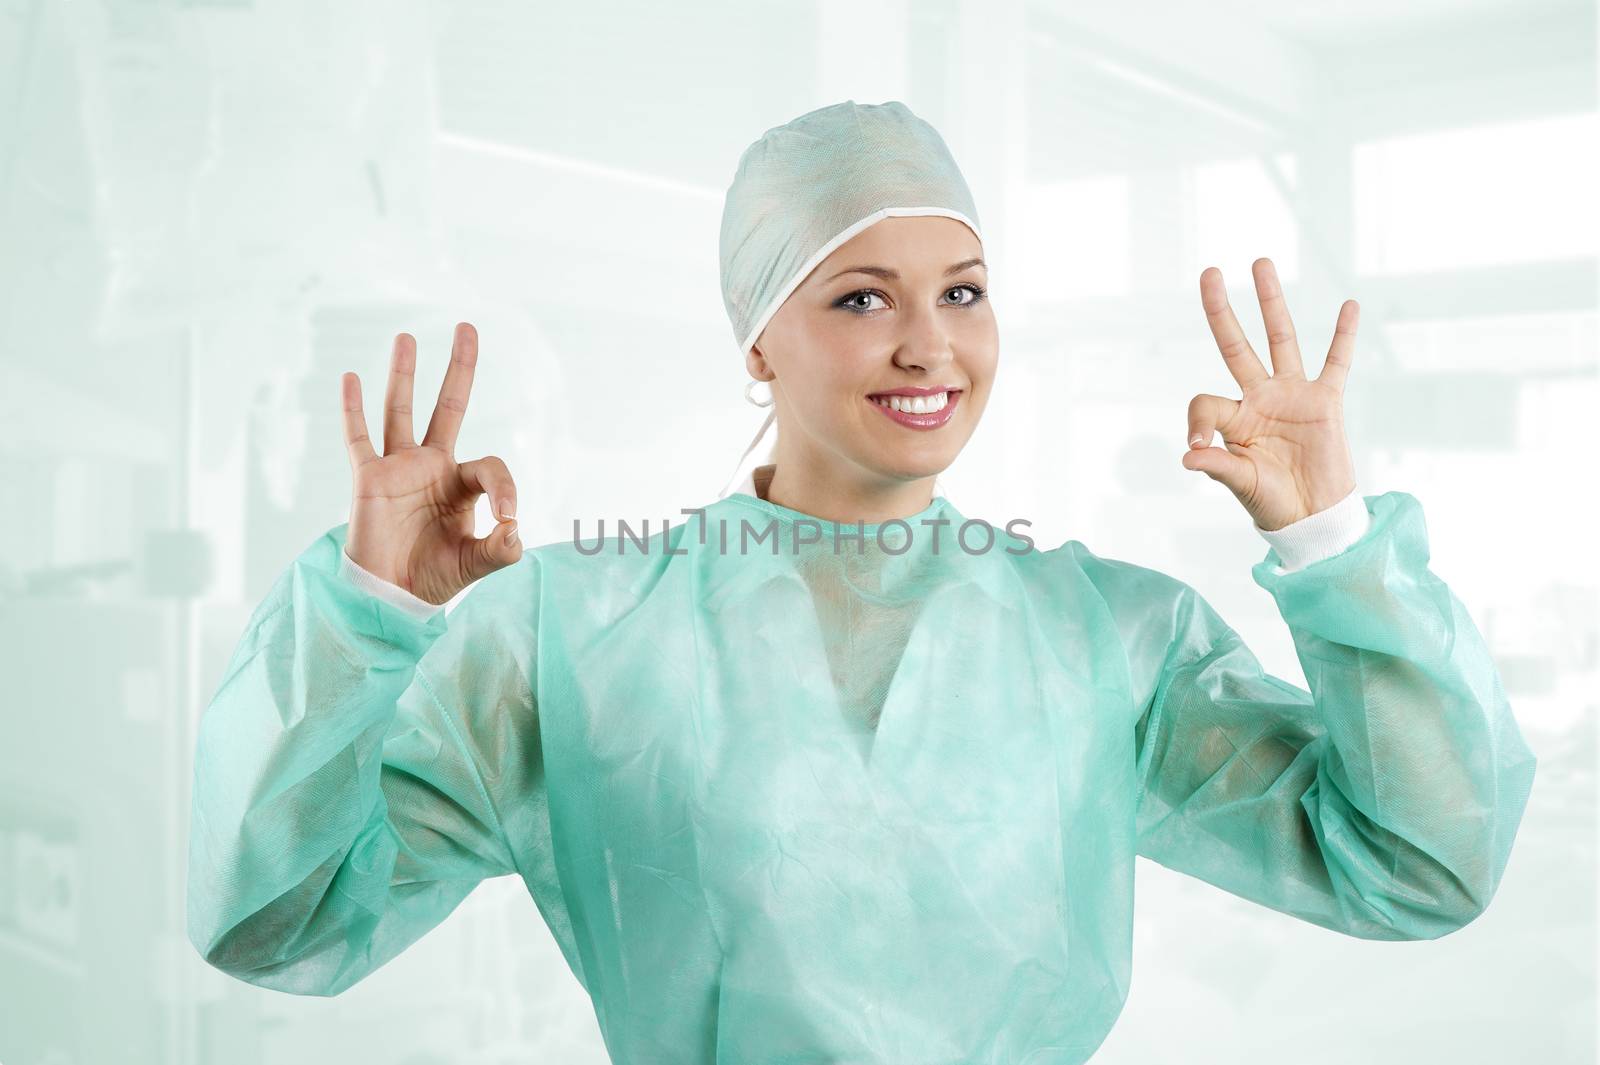 positive smiling woman with nurse dress acting and doing sign with hand